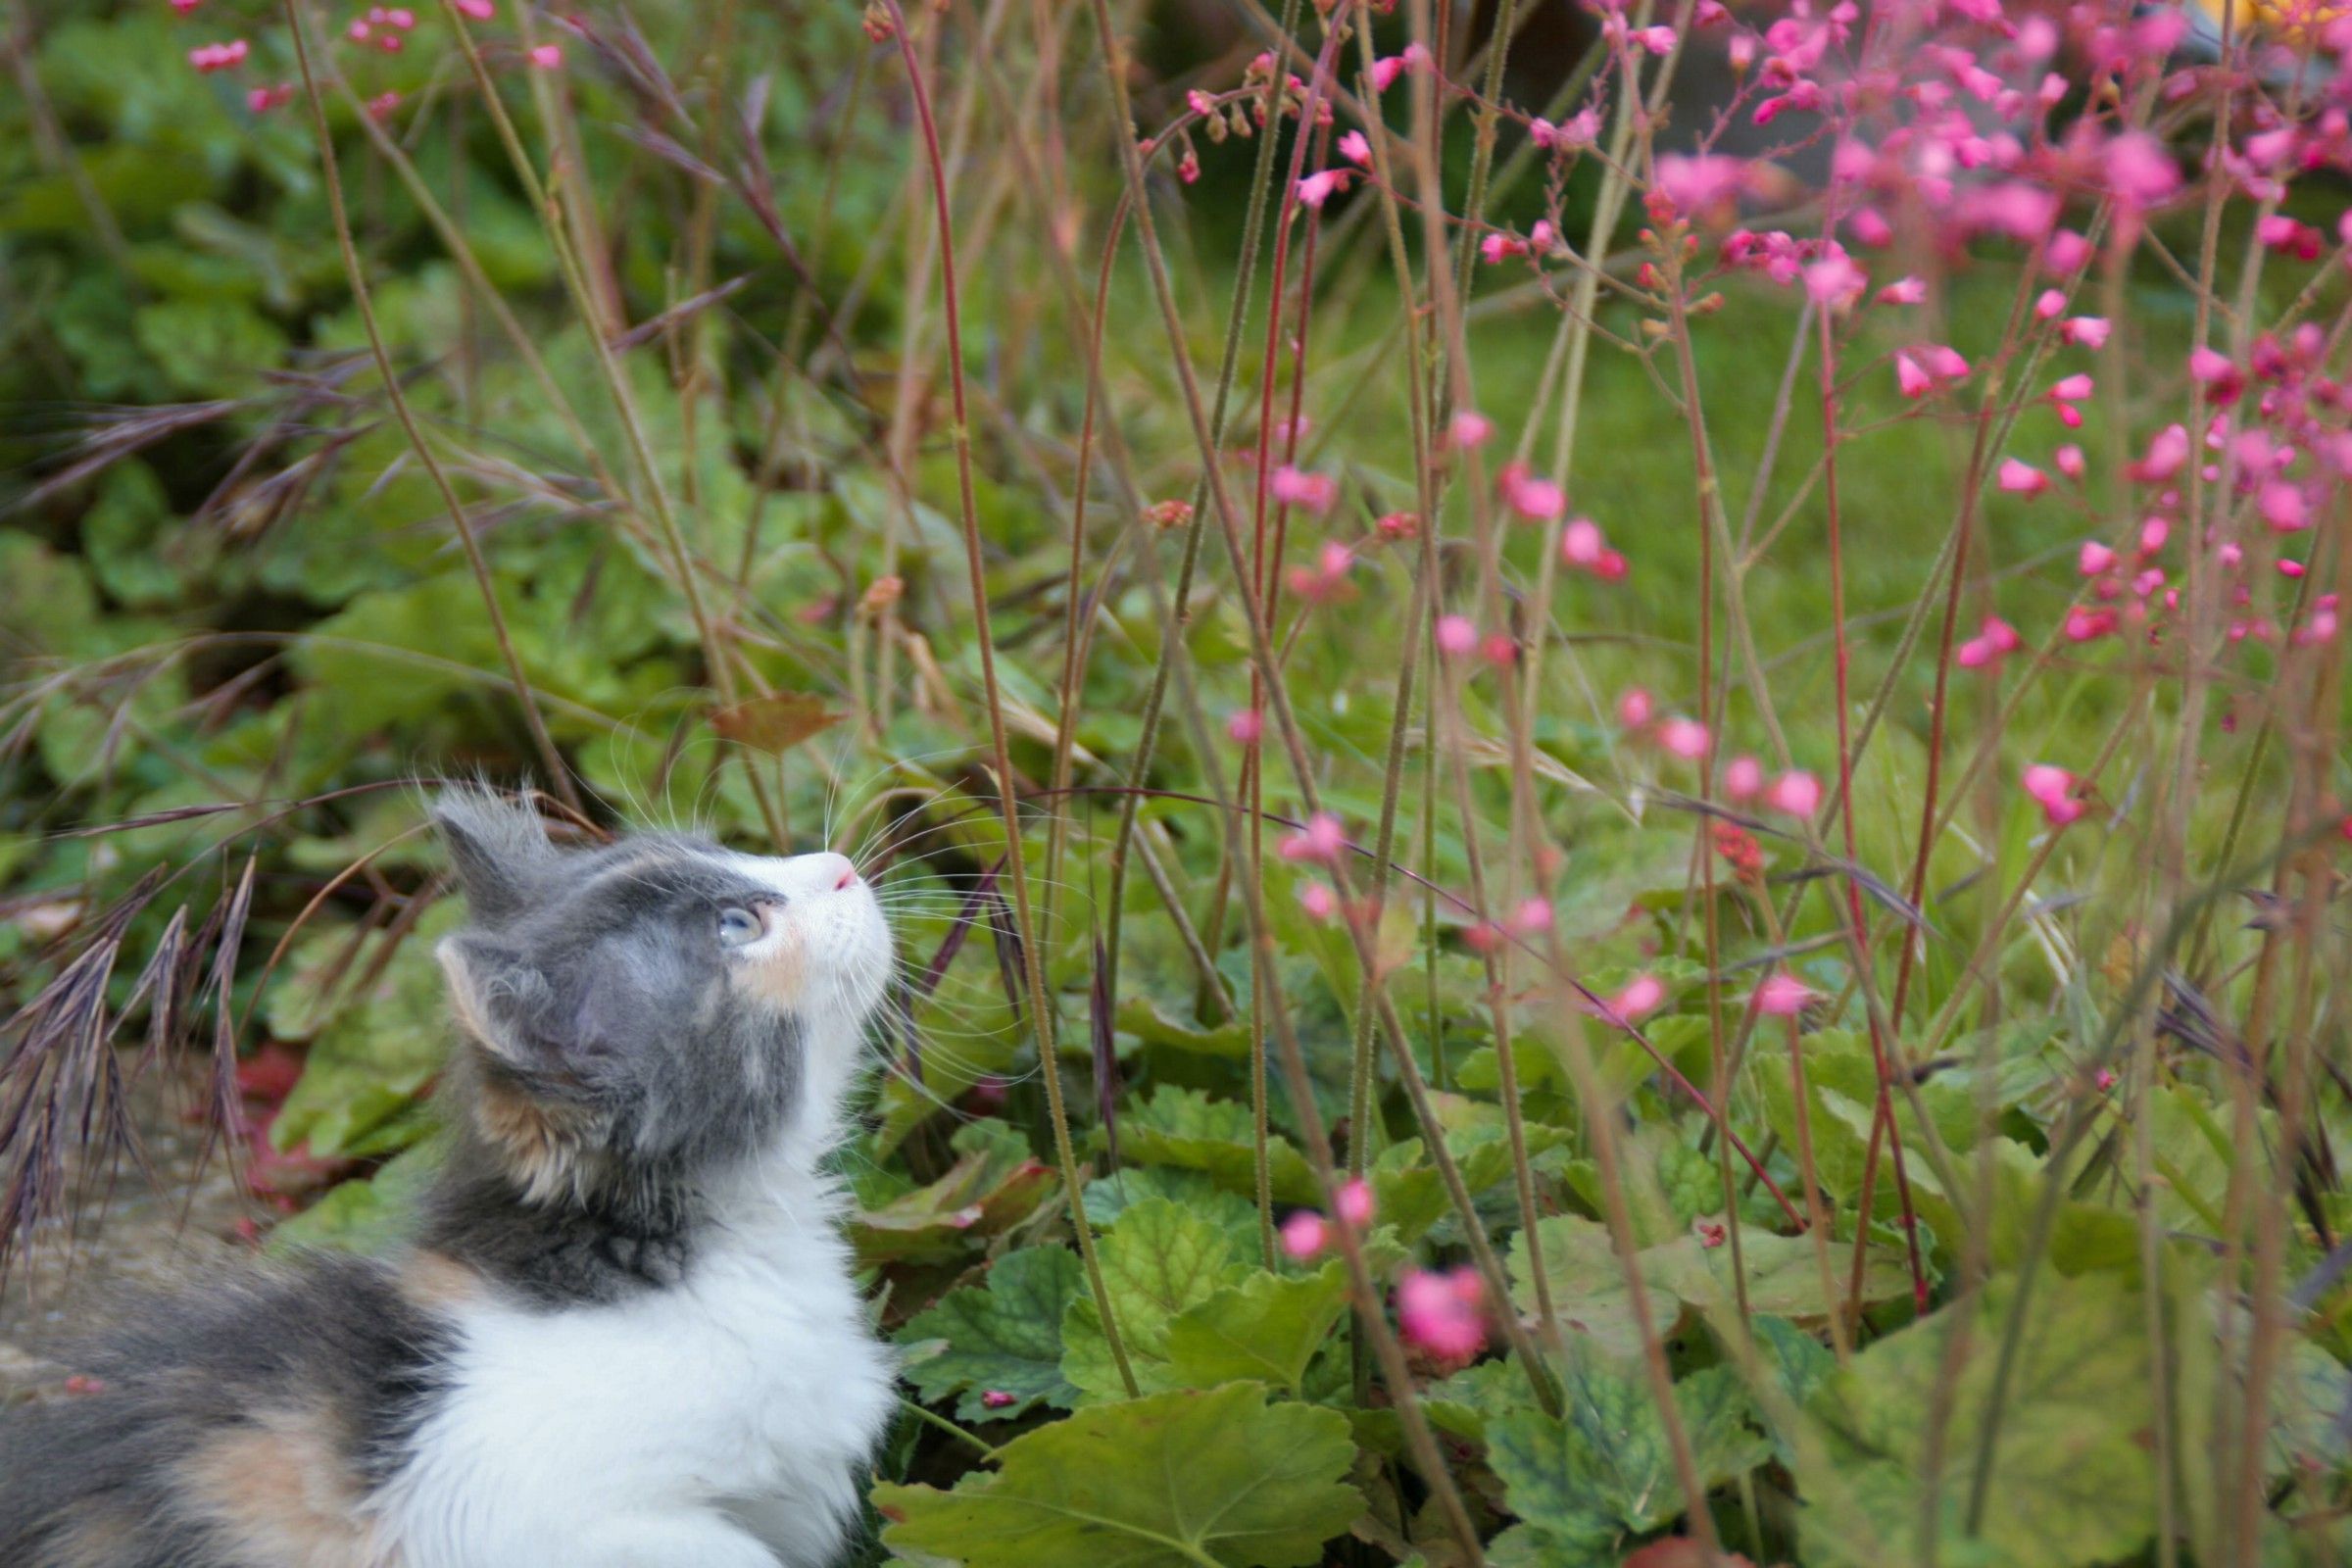 A calico cat looking up at some slender pink flowering plants, seeming like it might be getting ready to pounce.